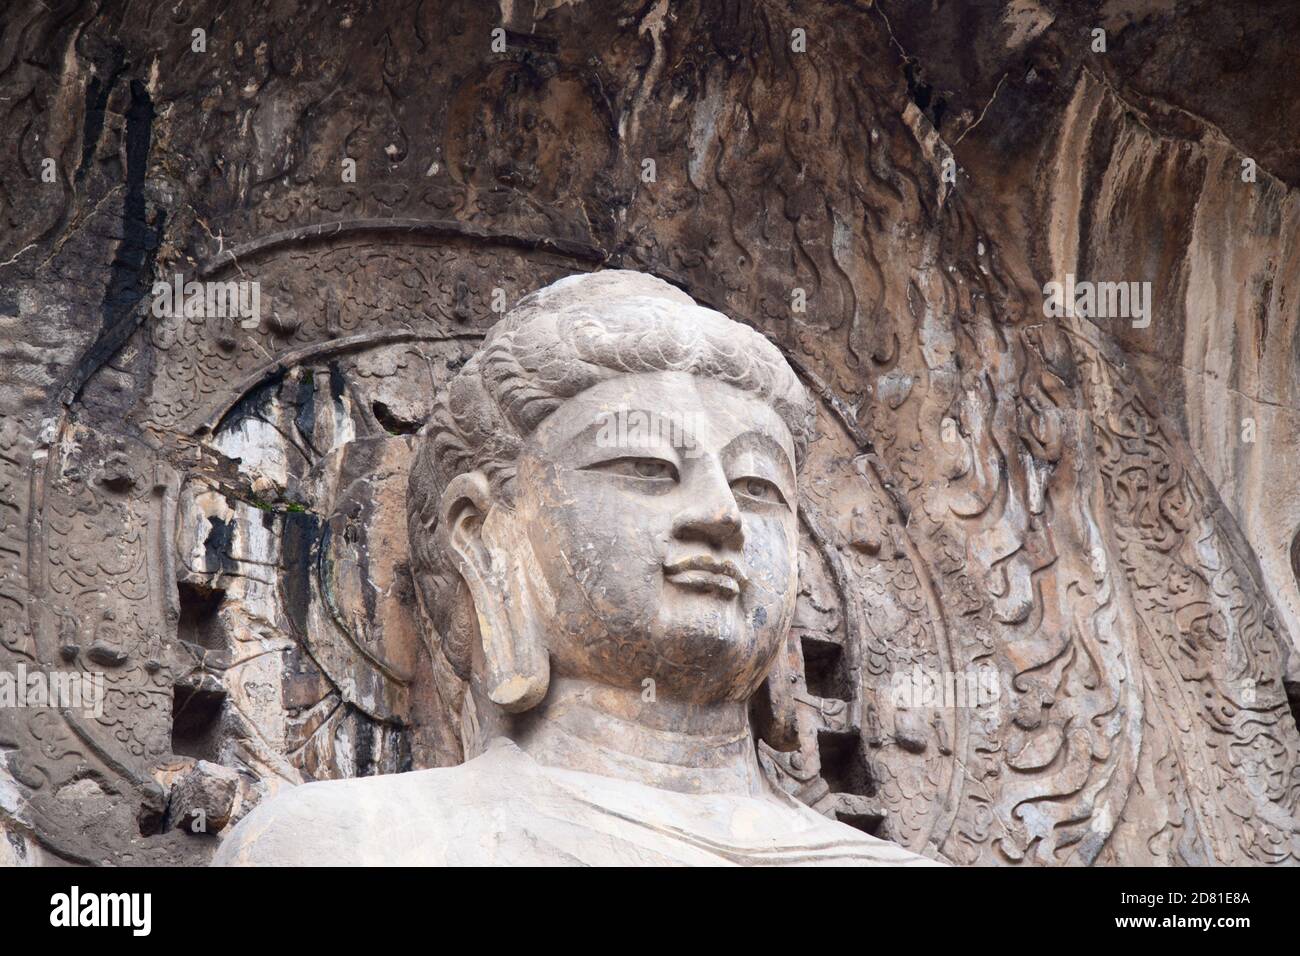 Famous Longmen Grottoes (statues of Buddha and Bodhisattvas carved in the monolith rock near Luoyang in Hennn province, China) Stock Photo